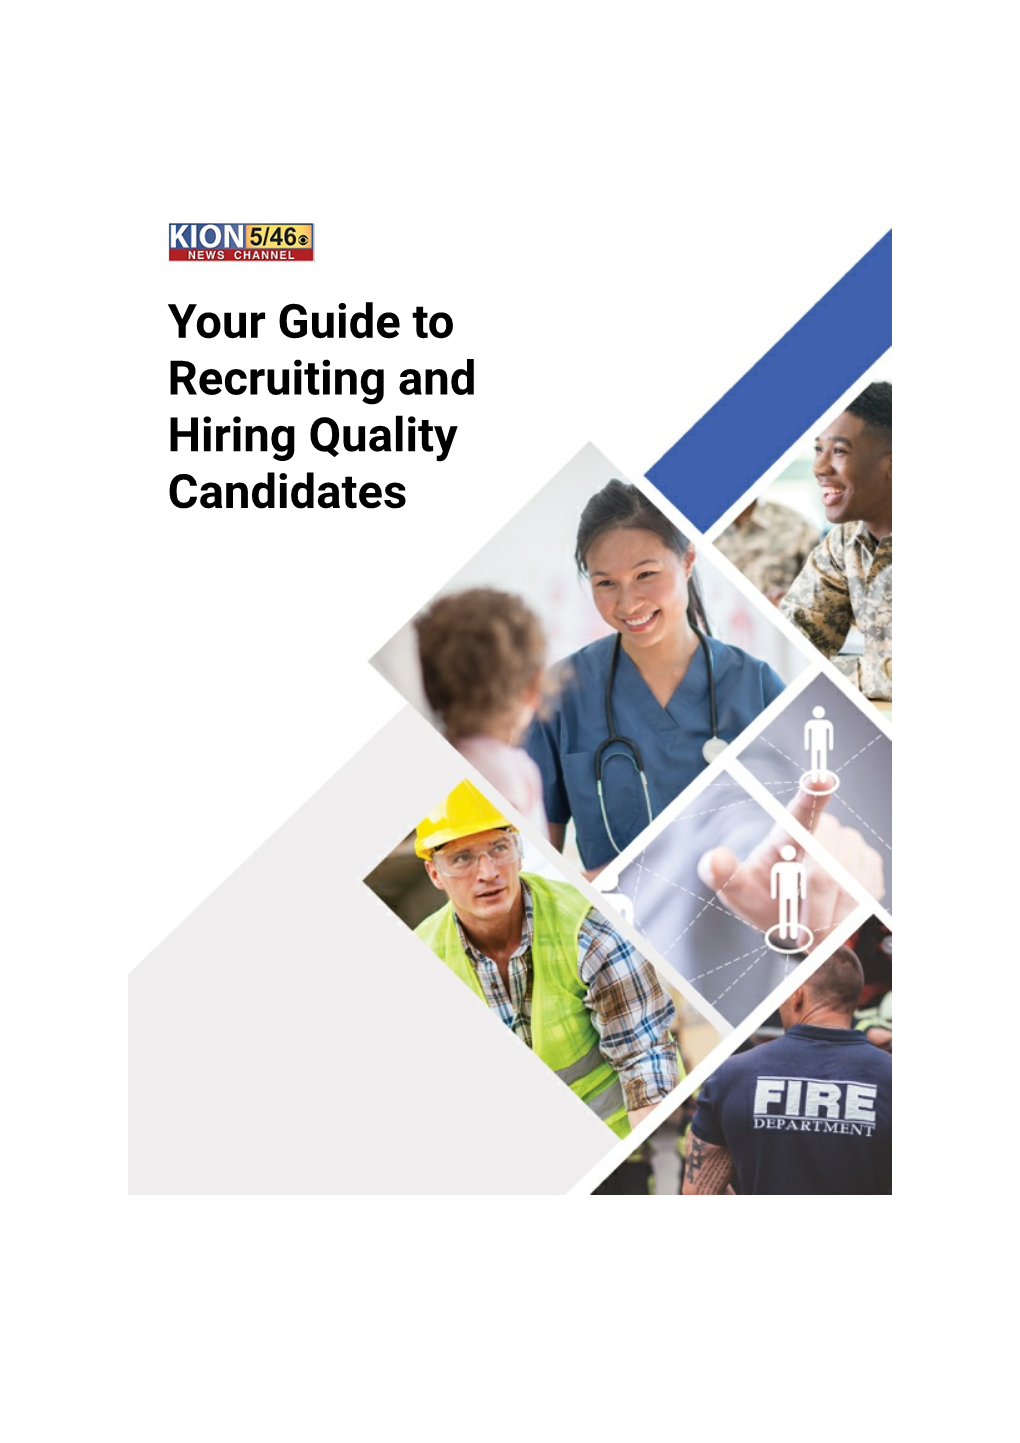 Your Guide to Recruiting and Hiring Quality Candidates